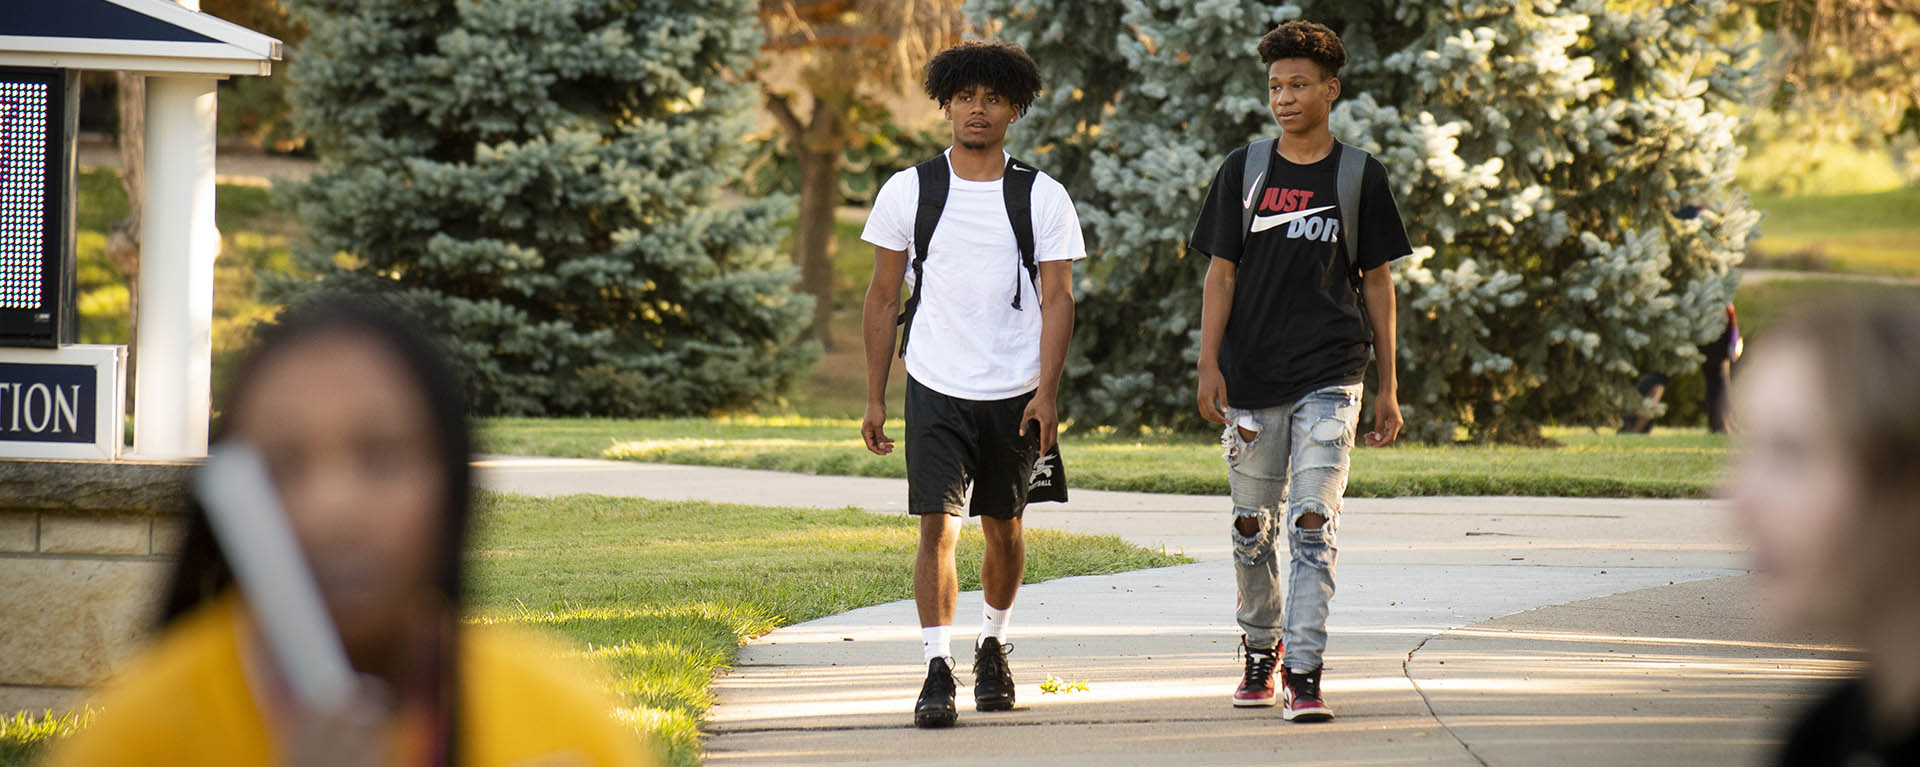 Two students smile and talk while carrying their backpacks as they walk through campus on an early fall day.